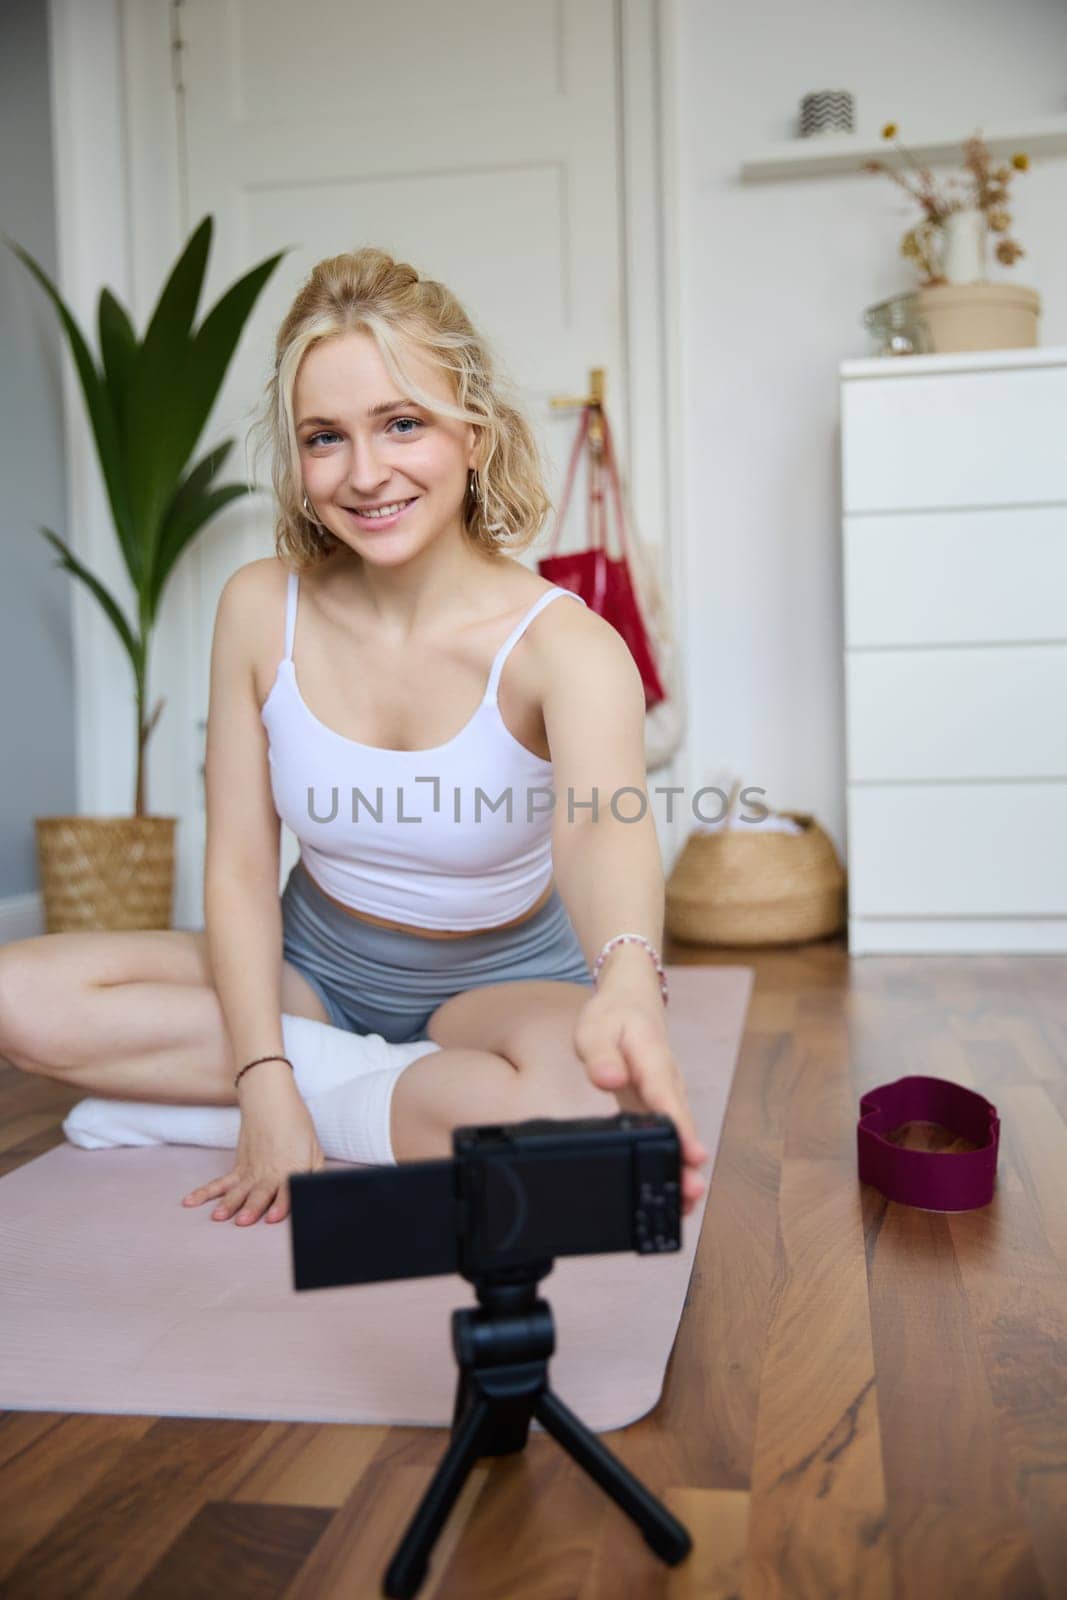 Vertical shot of woman recording her workout on digital camera, making a video about yoga and fitness at home, sitting on rubber mat in activewear.